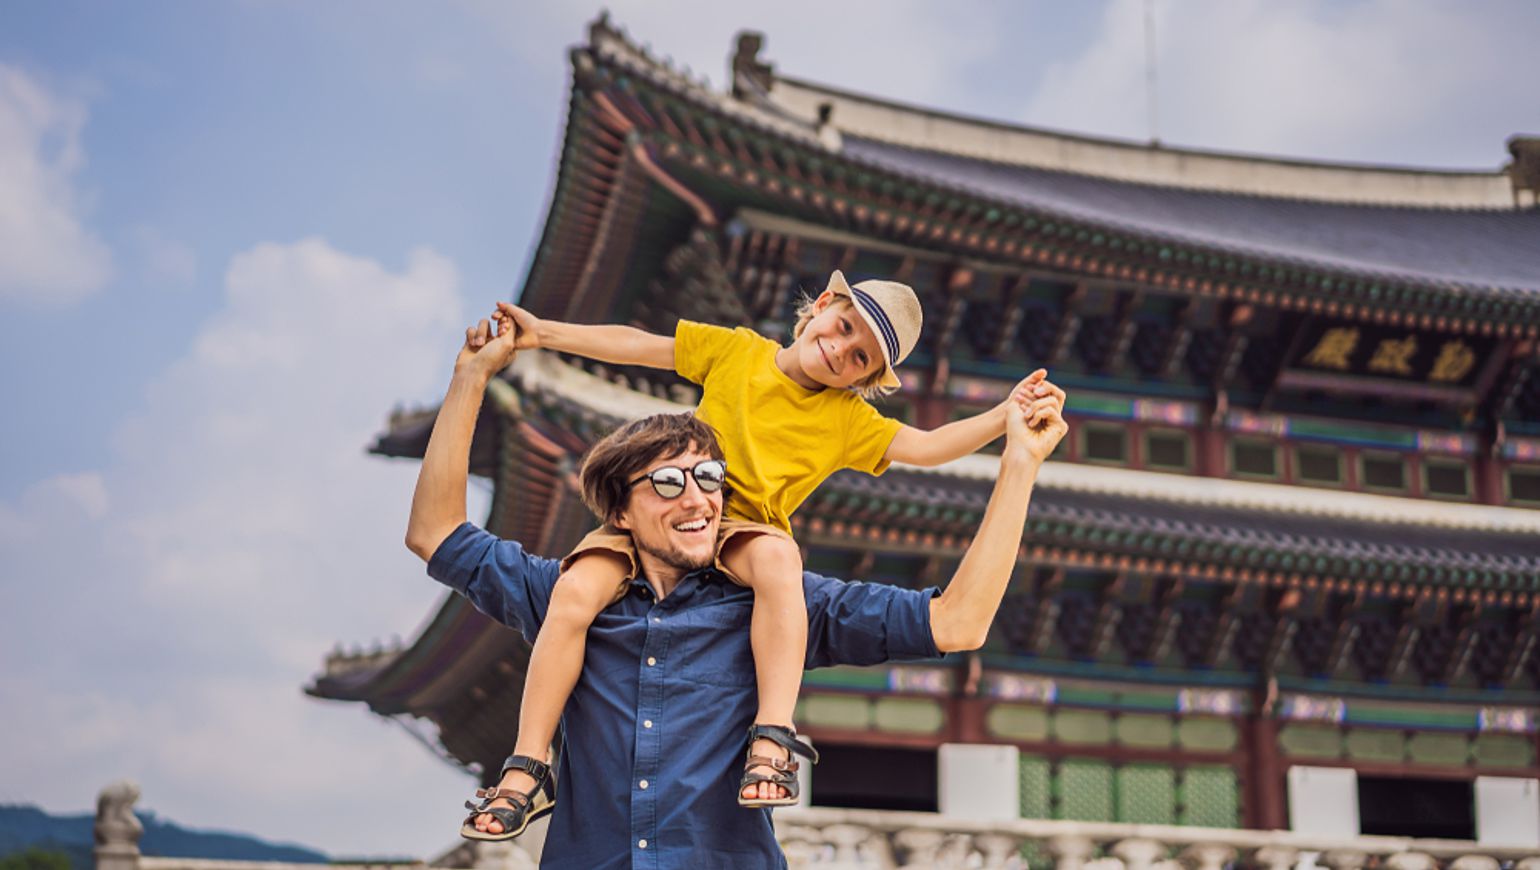 seoul family tour packages